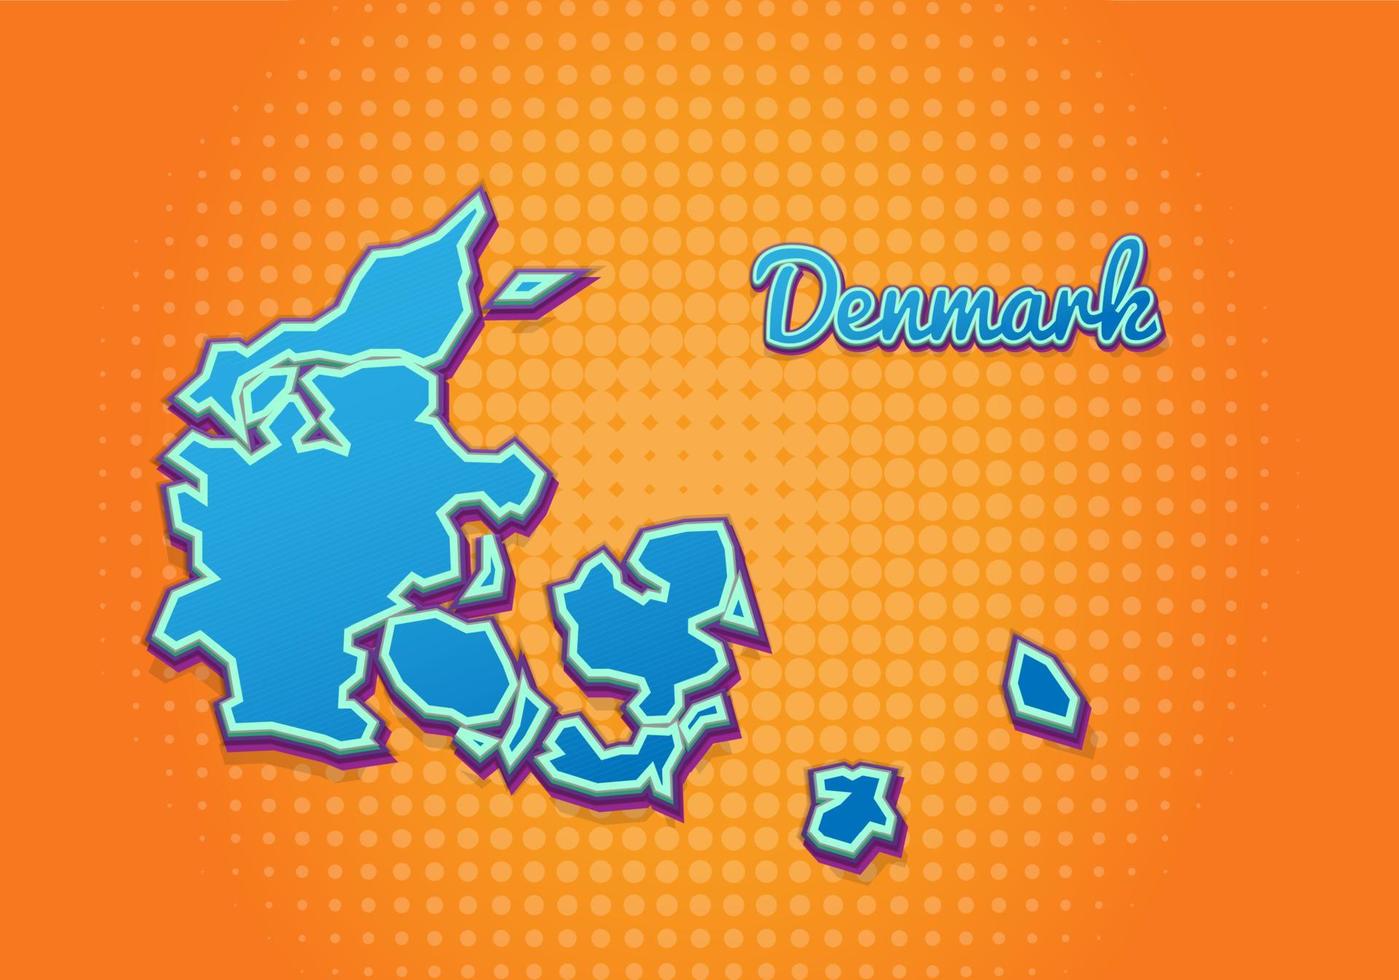 Retro map of denmark with halftone background. Cartoon map icon in comic book and pop art style. Cartography business concept. Great for kids design,educational game,magnet or poster design. vector